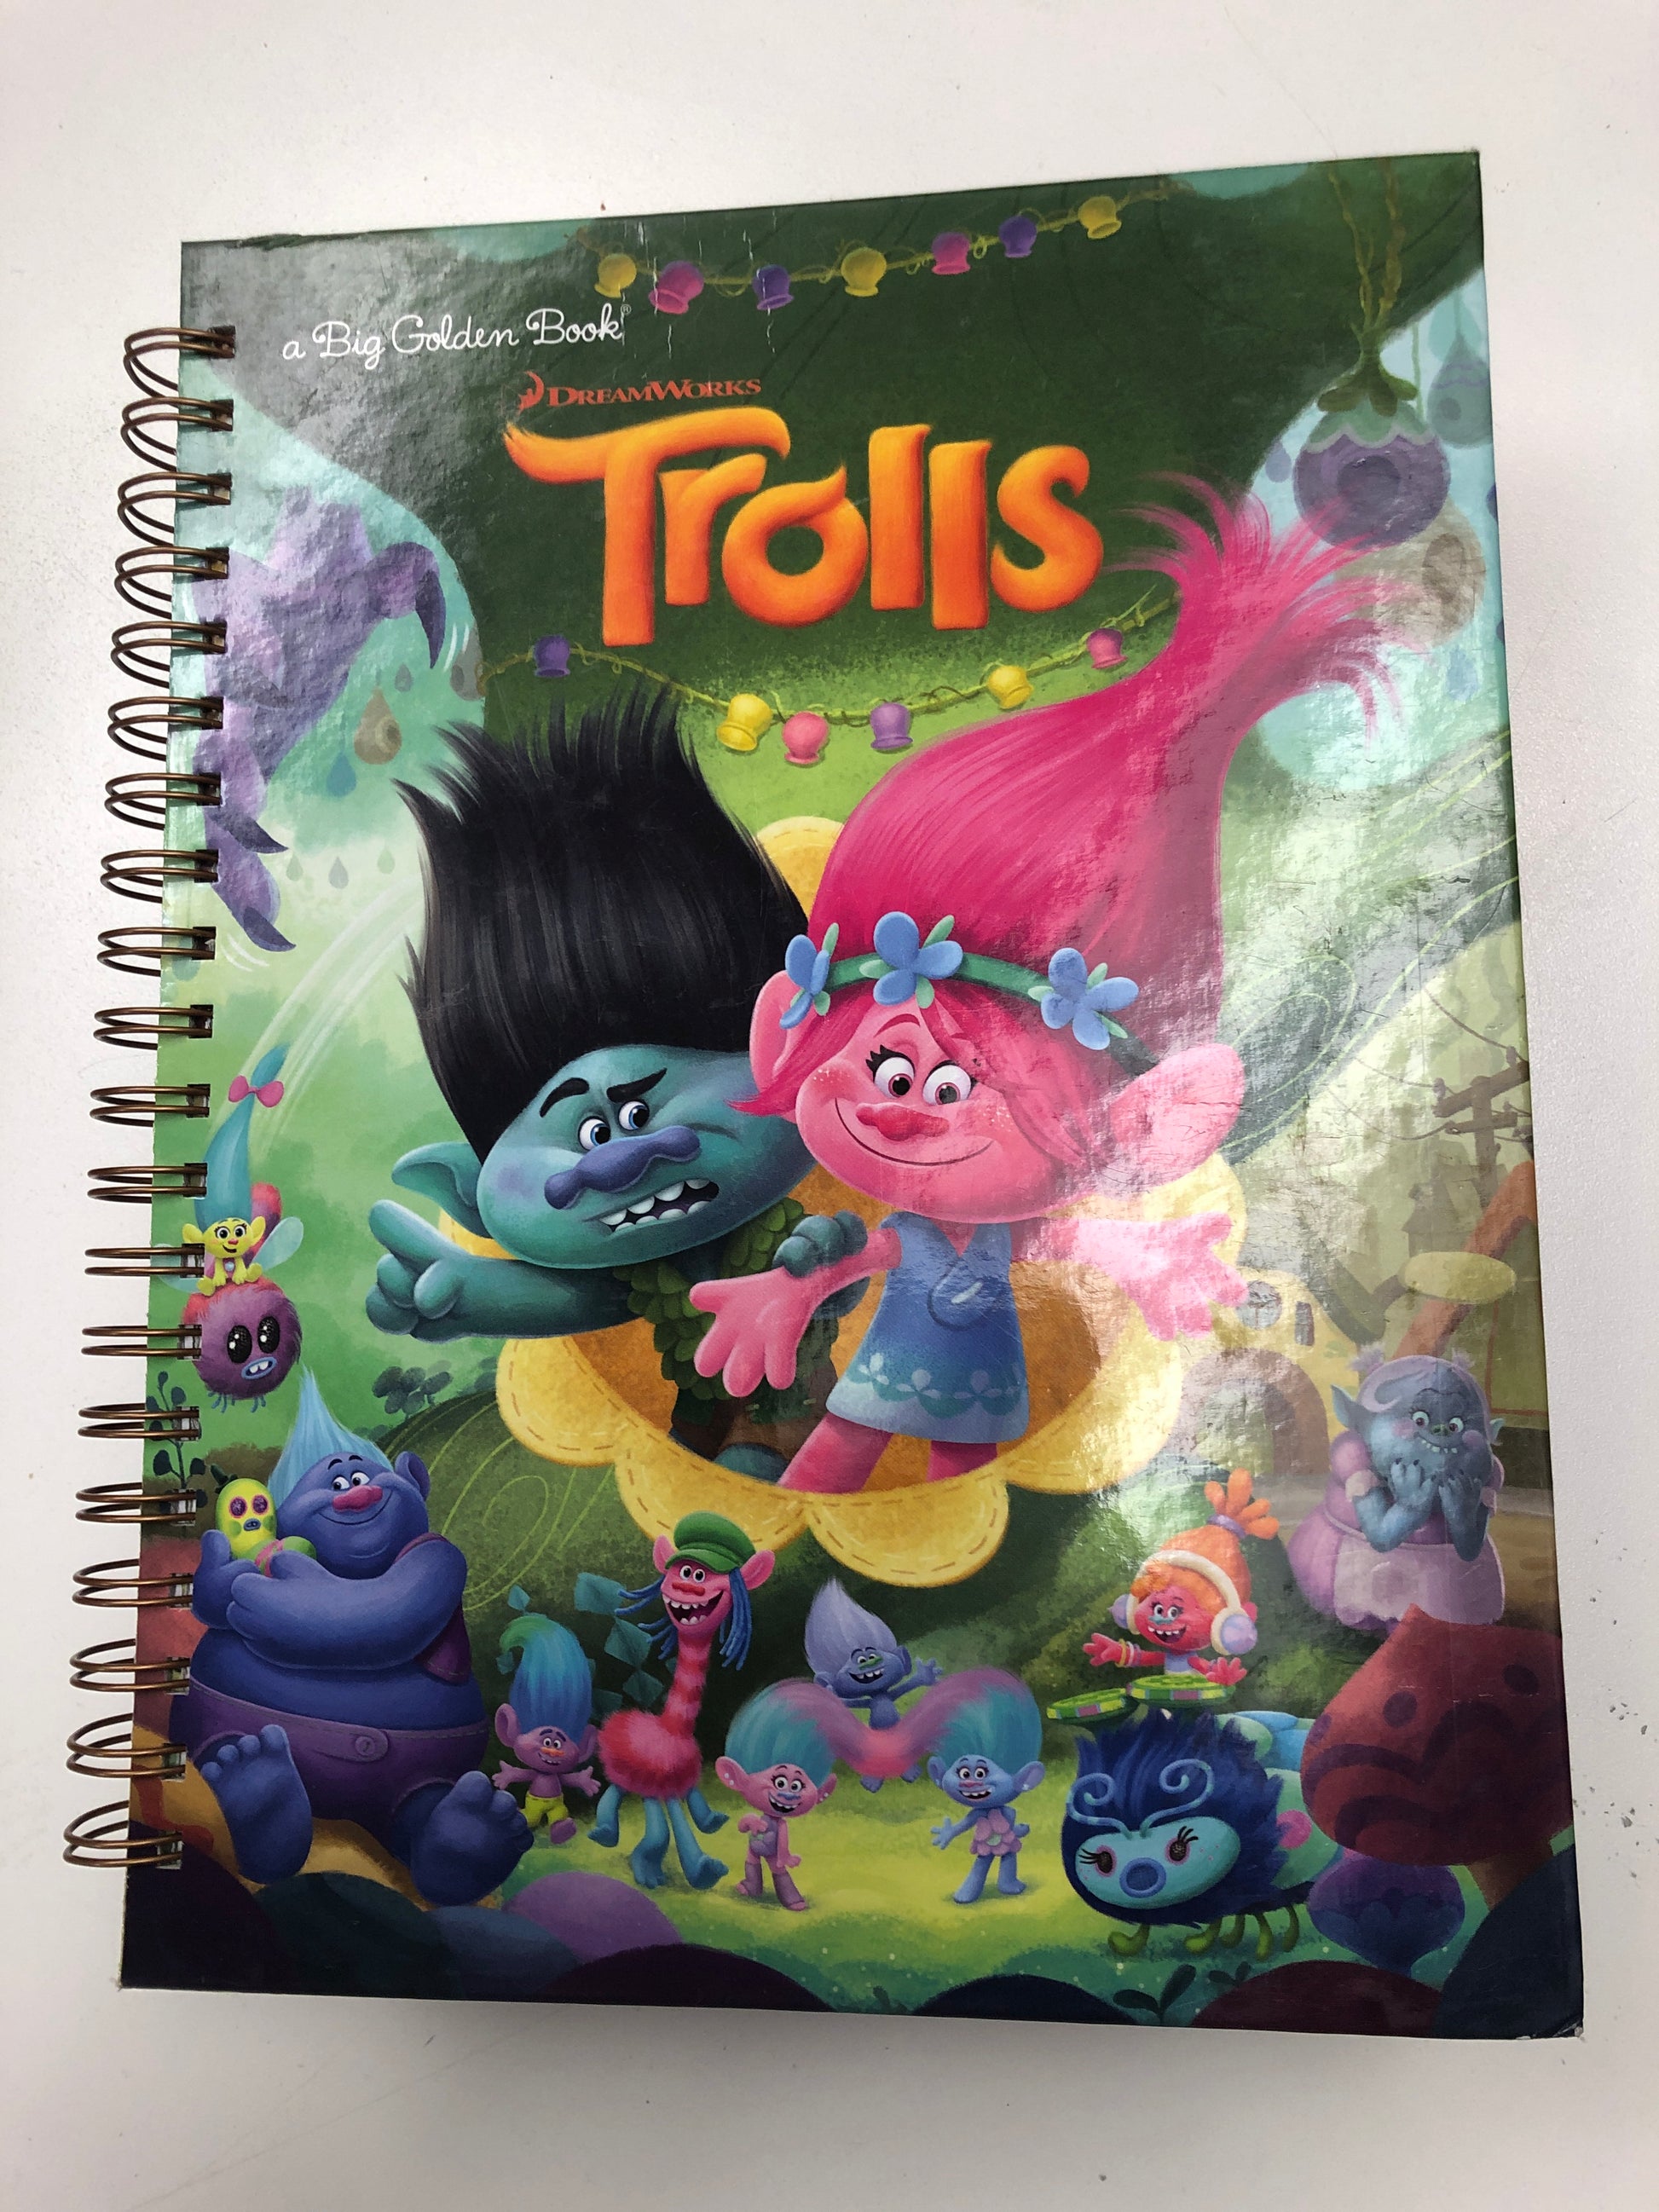 Trolls-Red Barn Collections